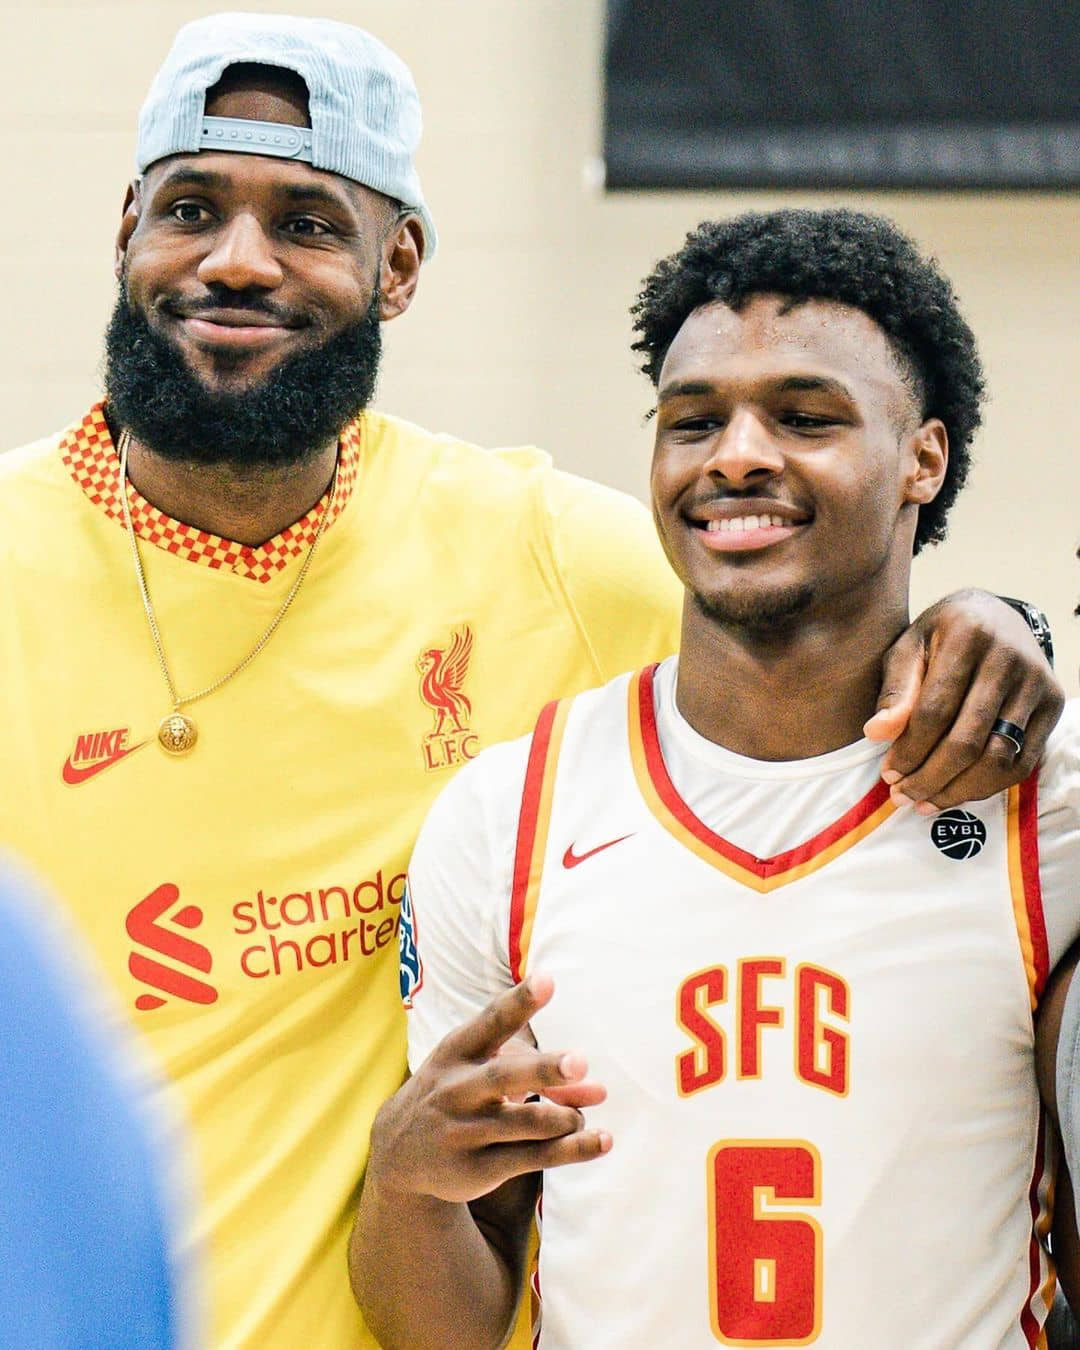 LeBron James, an NBA legend, released a heartfelt video to celebrate his son Bronny's 18th birthday